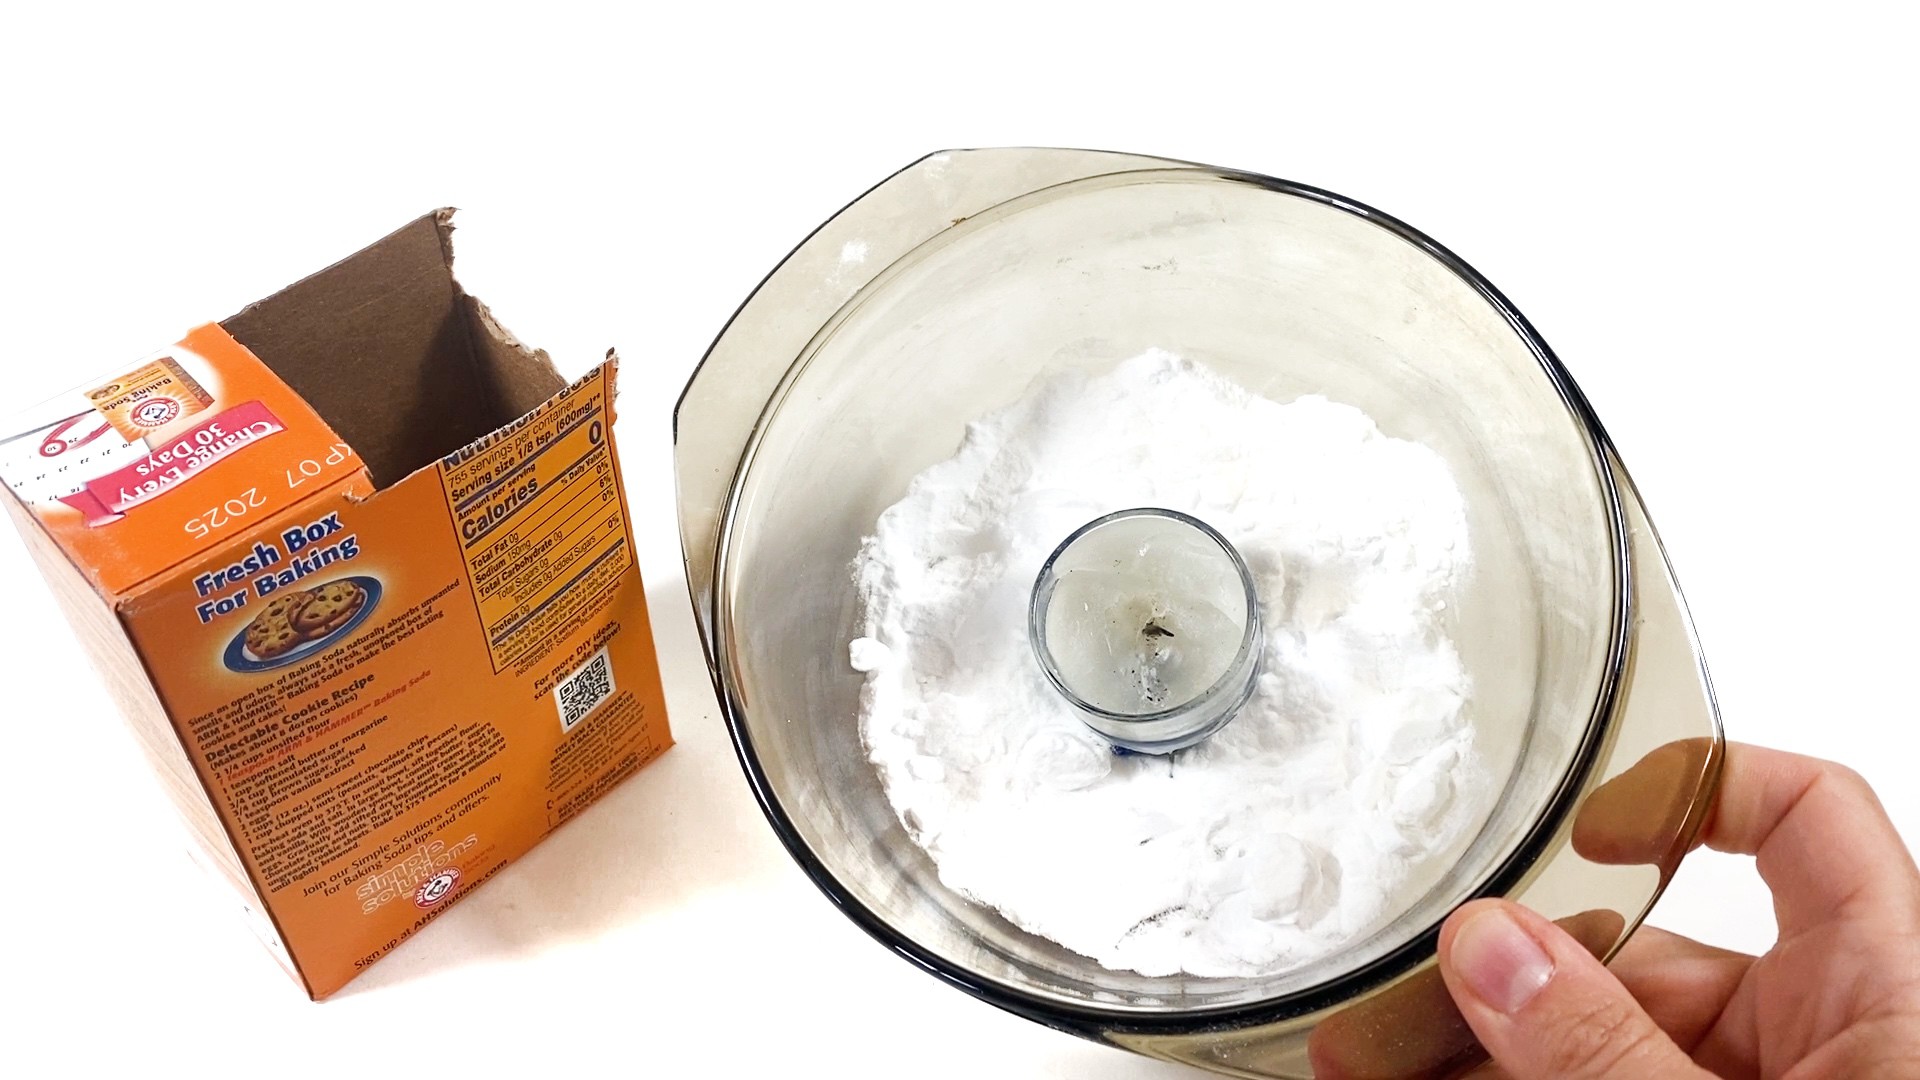 The image shows a bowl with a candle inside next to a container of baking soda. Baking soda is sprinkled around the candle in the bowl.